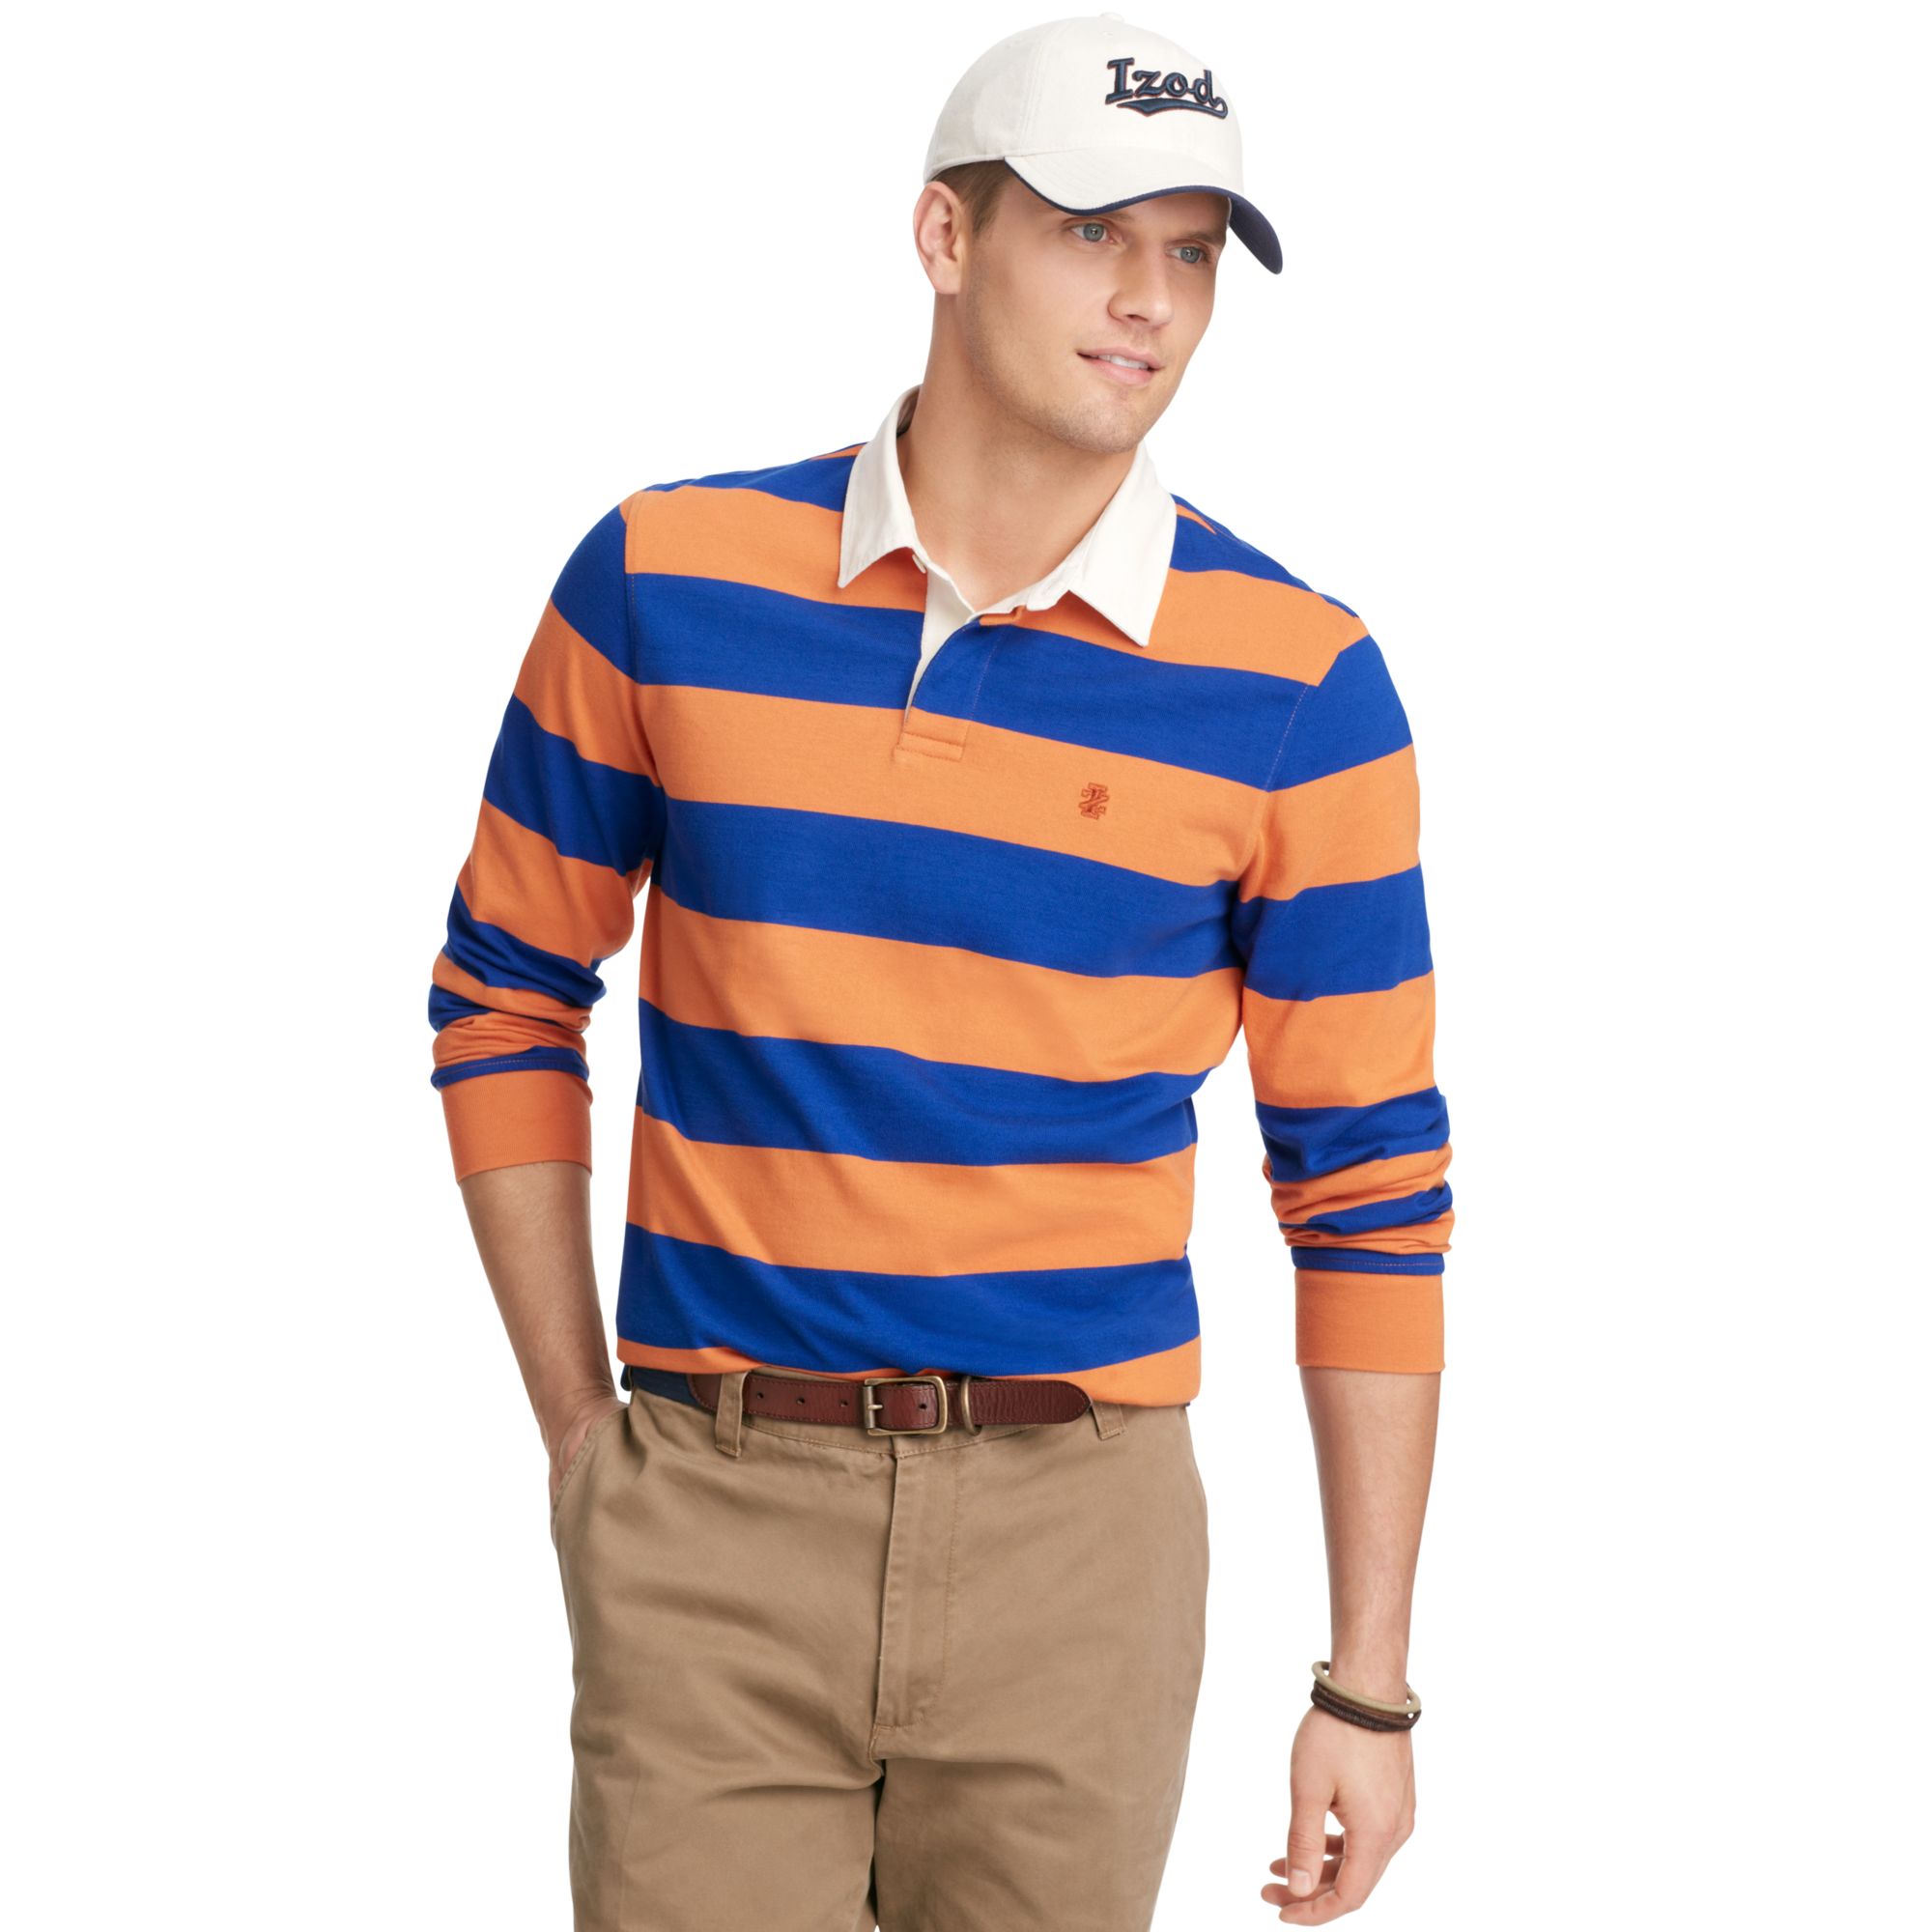 Lyst - Izod Big and Tall Shirt Longsleeve Rugby Shirt in Blue for Men